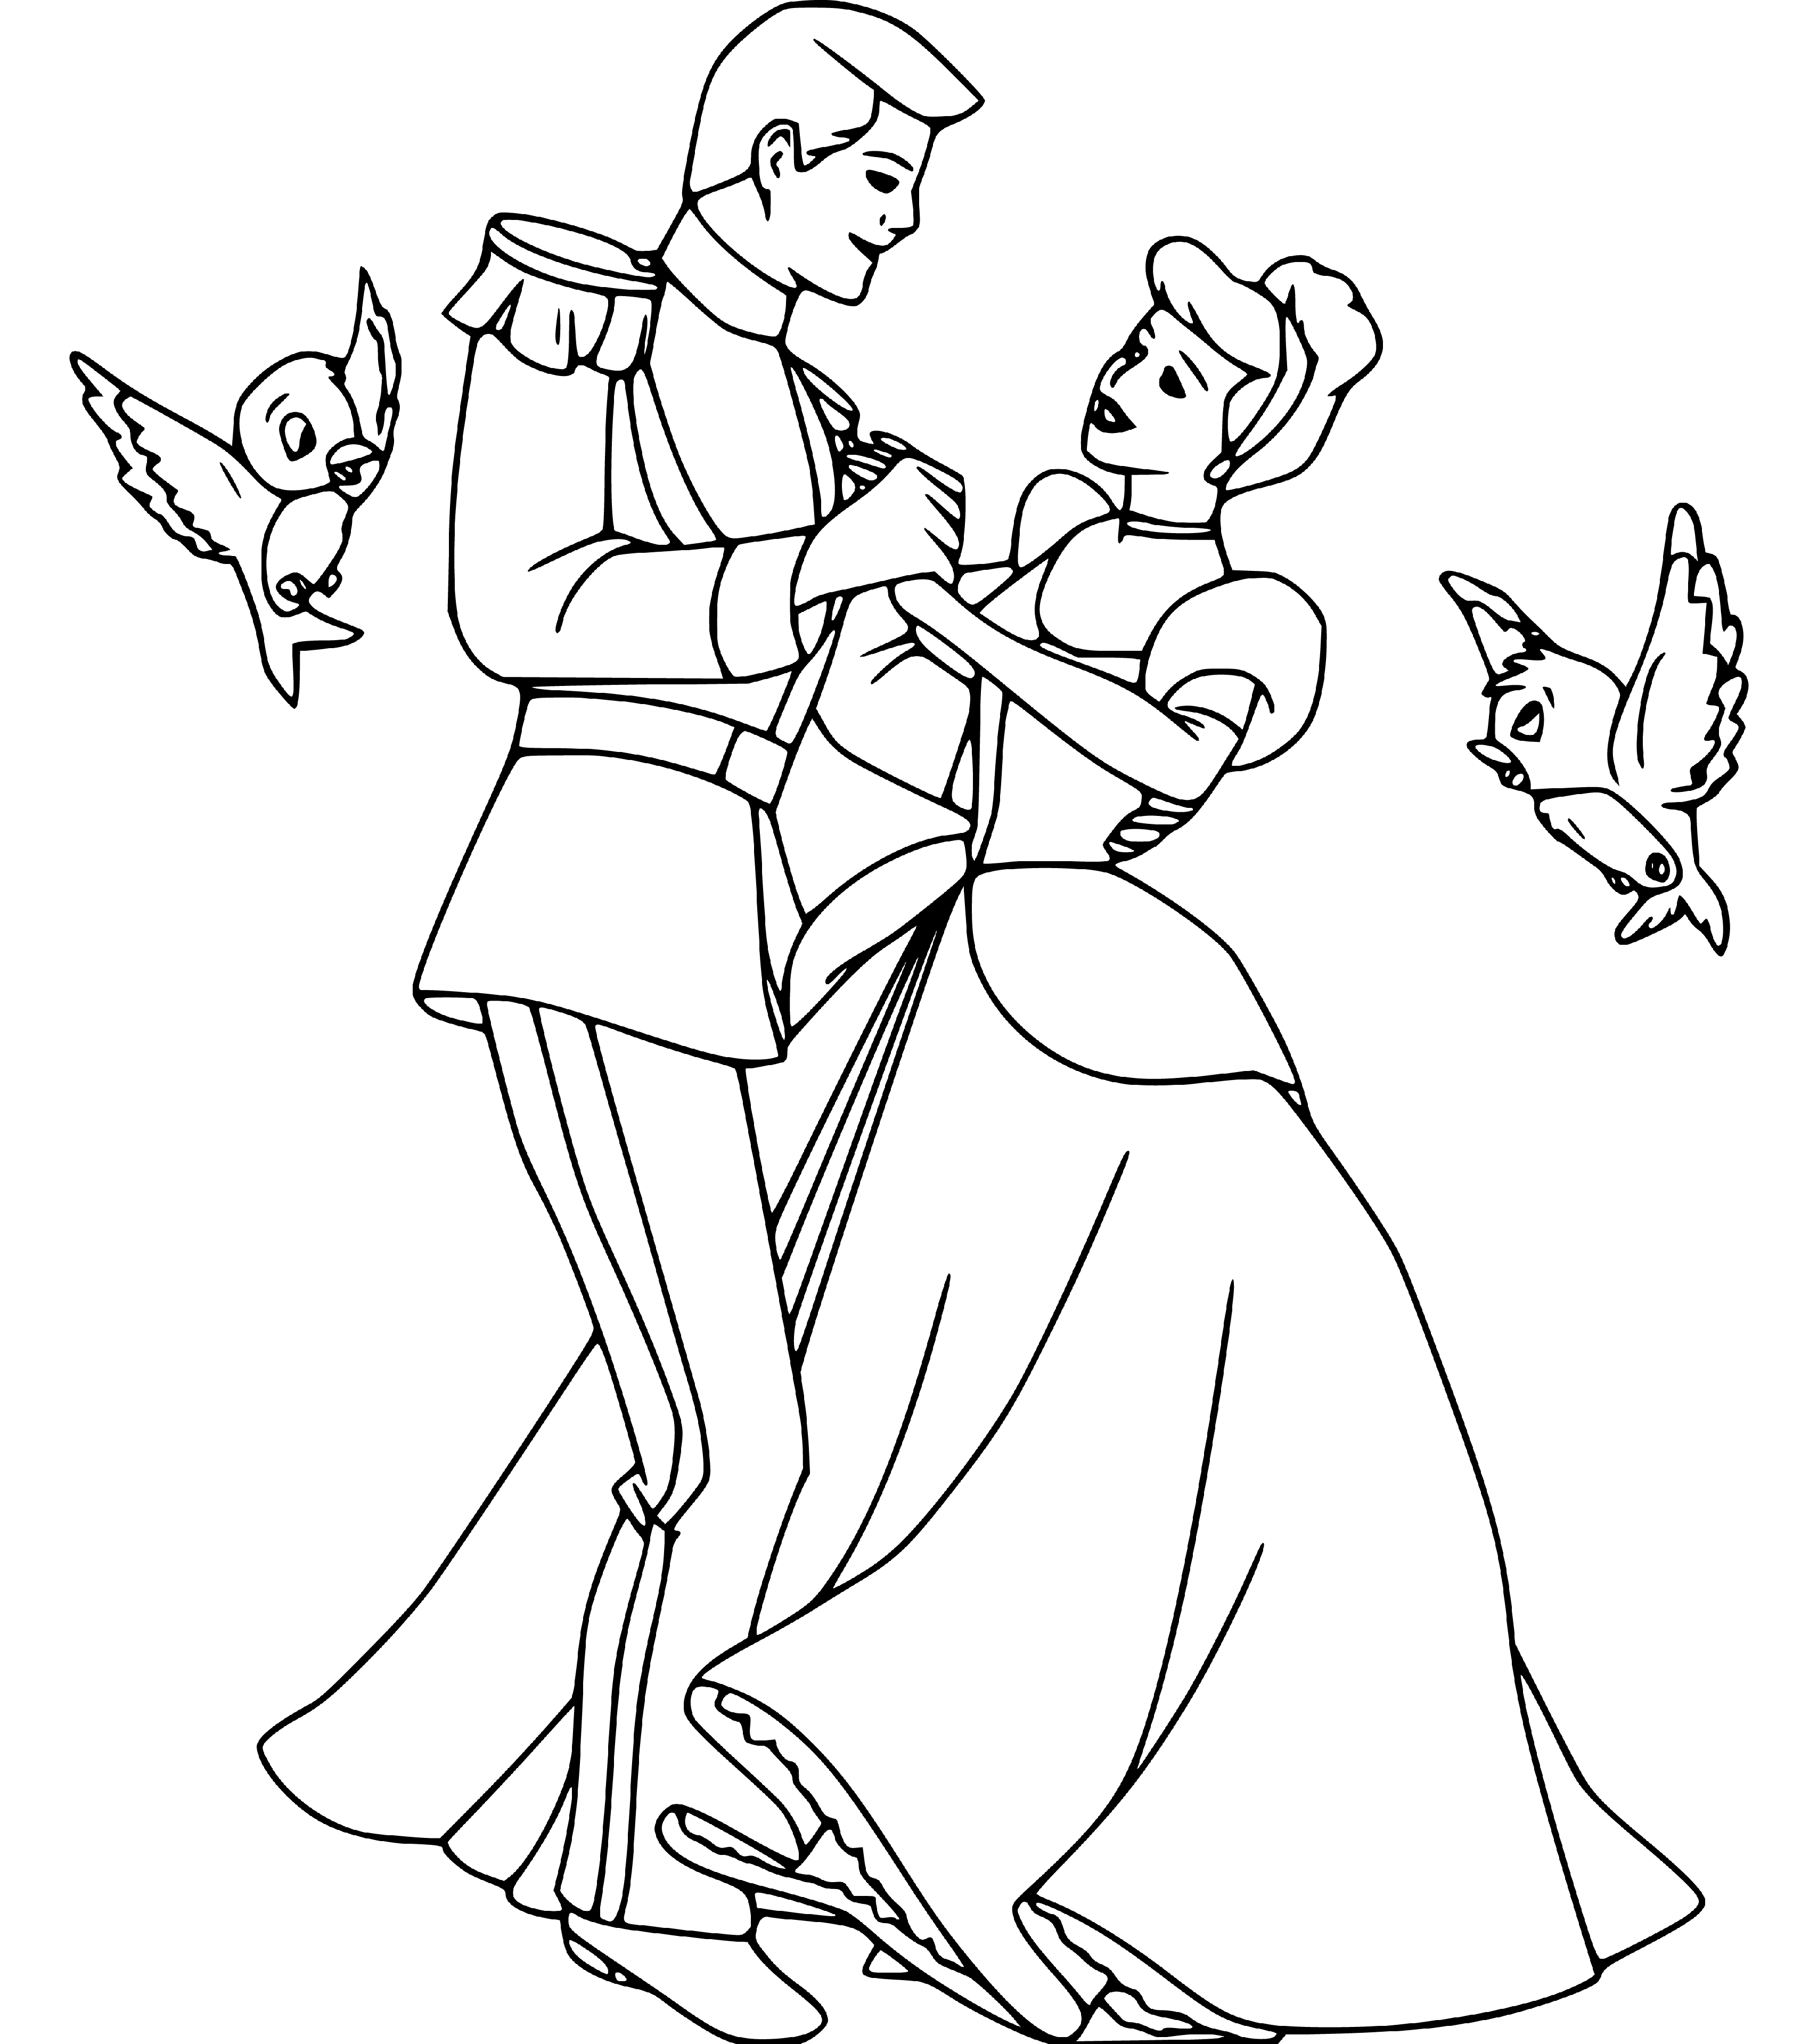 Prince Charming and Cinderella Dancing and Birds Coloring Pages for Kids printable - SheetalColor.com